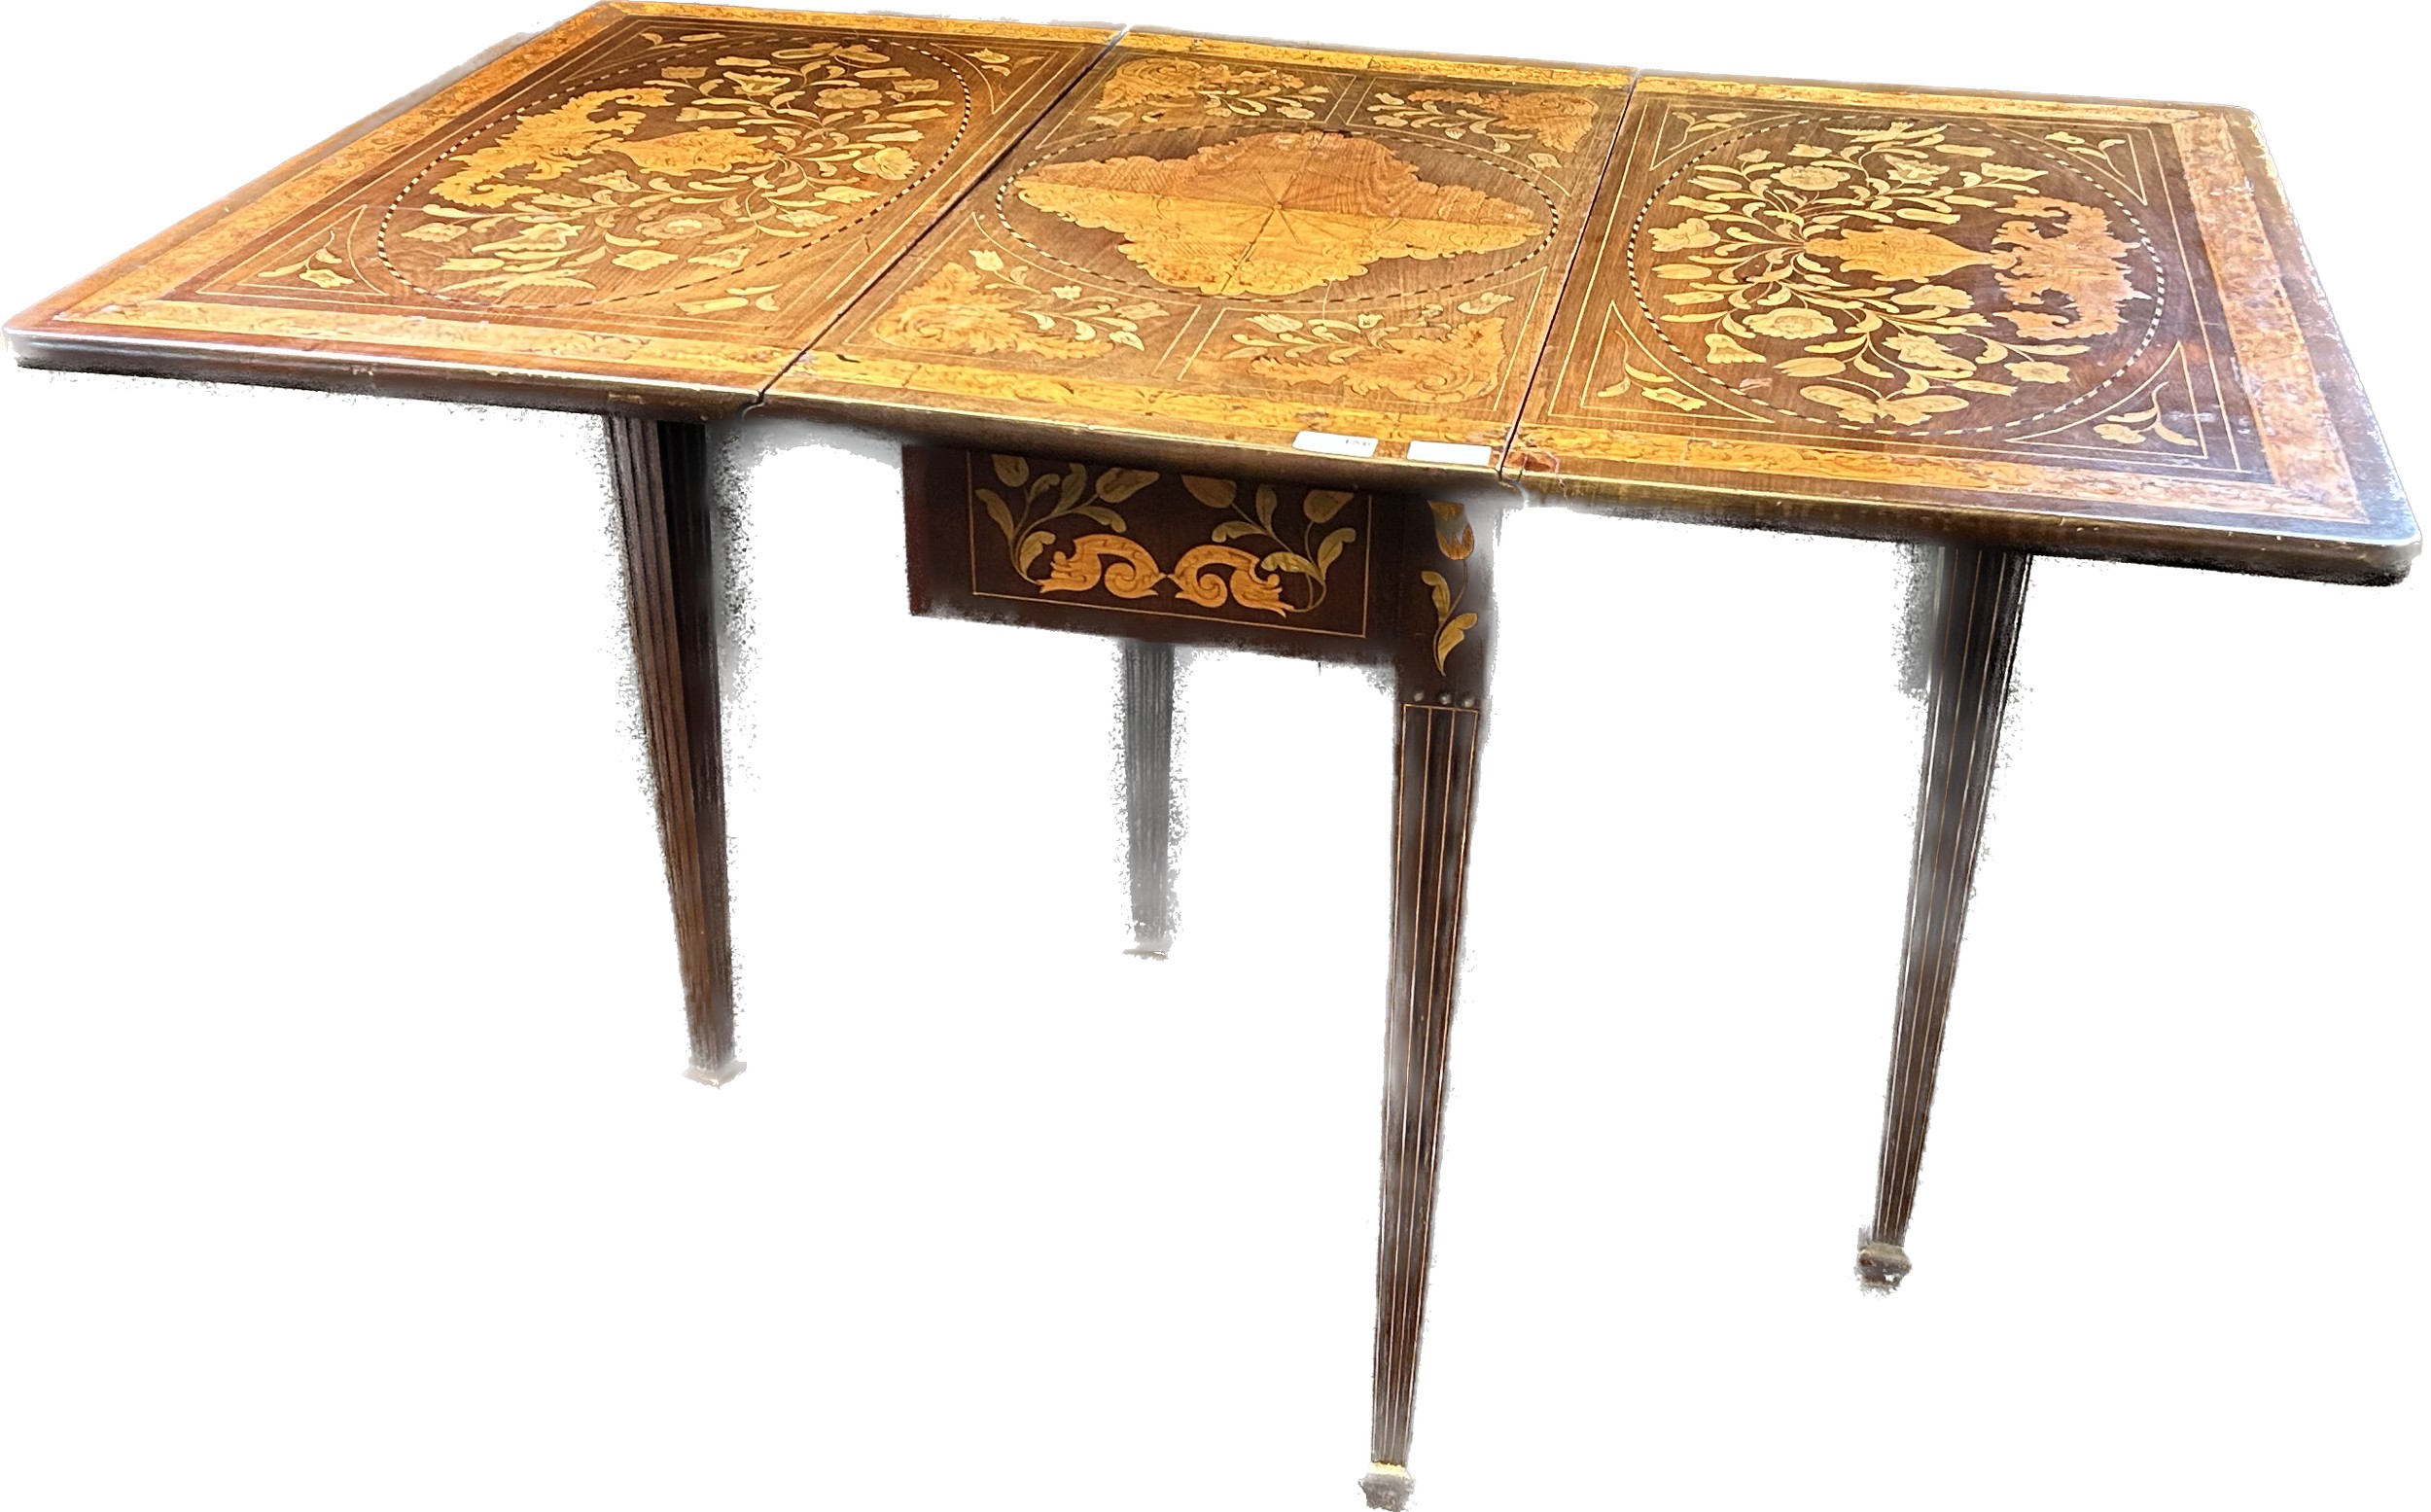 19th century Dutch table, the drop ends raising to a marquetry surface, the base with further - Image 8 of 8